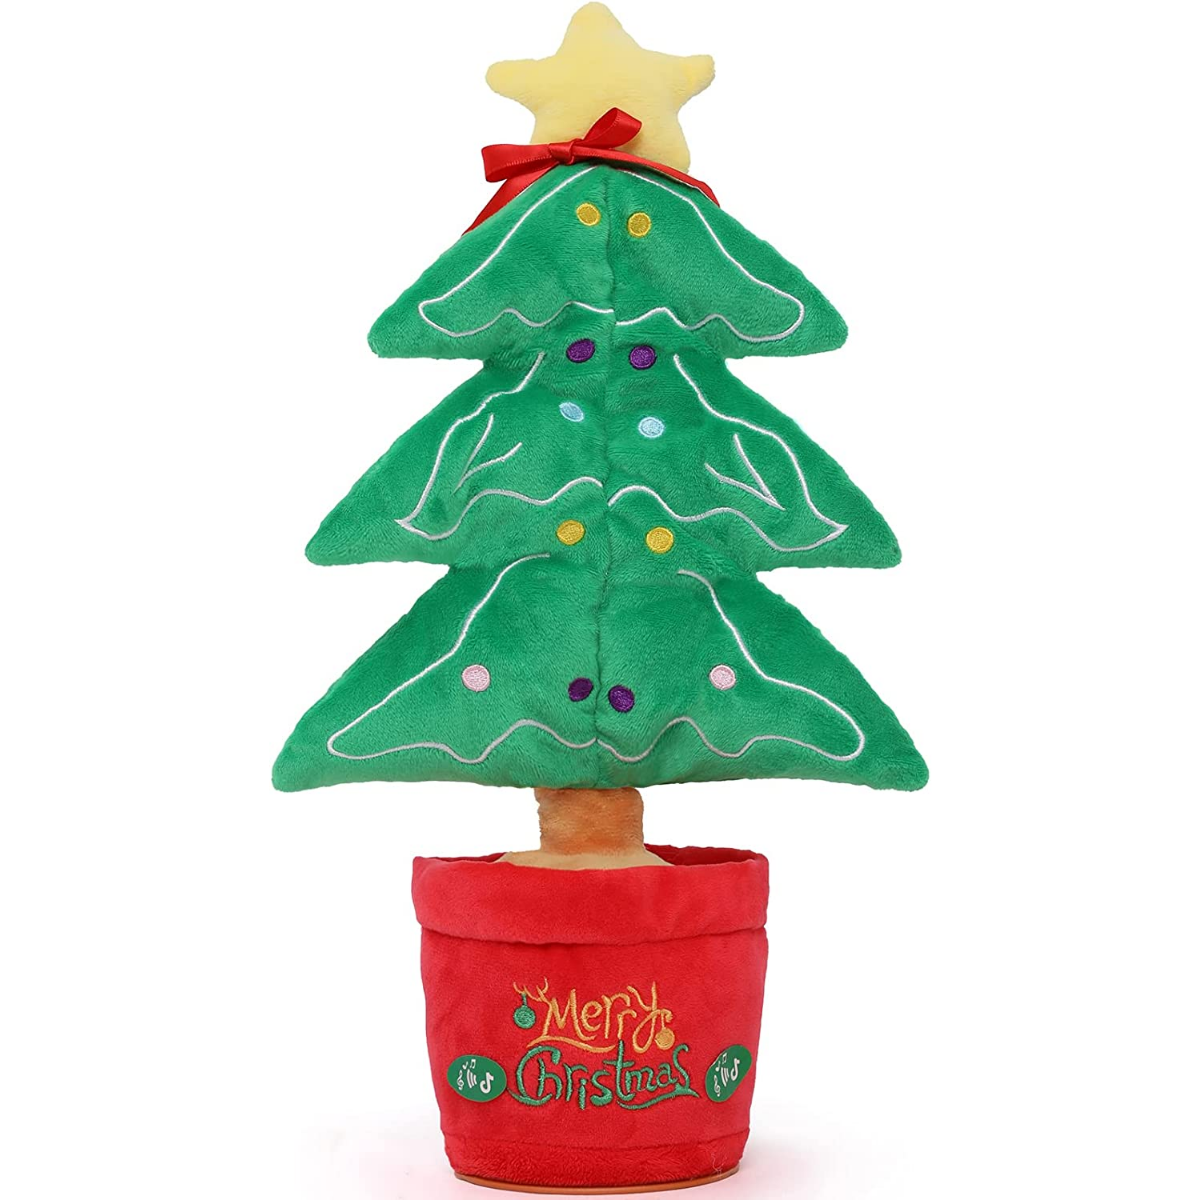 Christmas Tree Dancing Plush Toy, 13.7 Inches